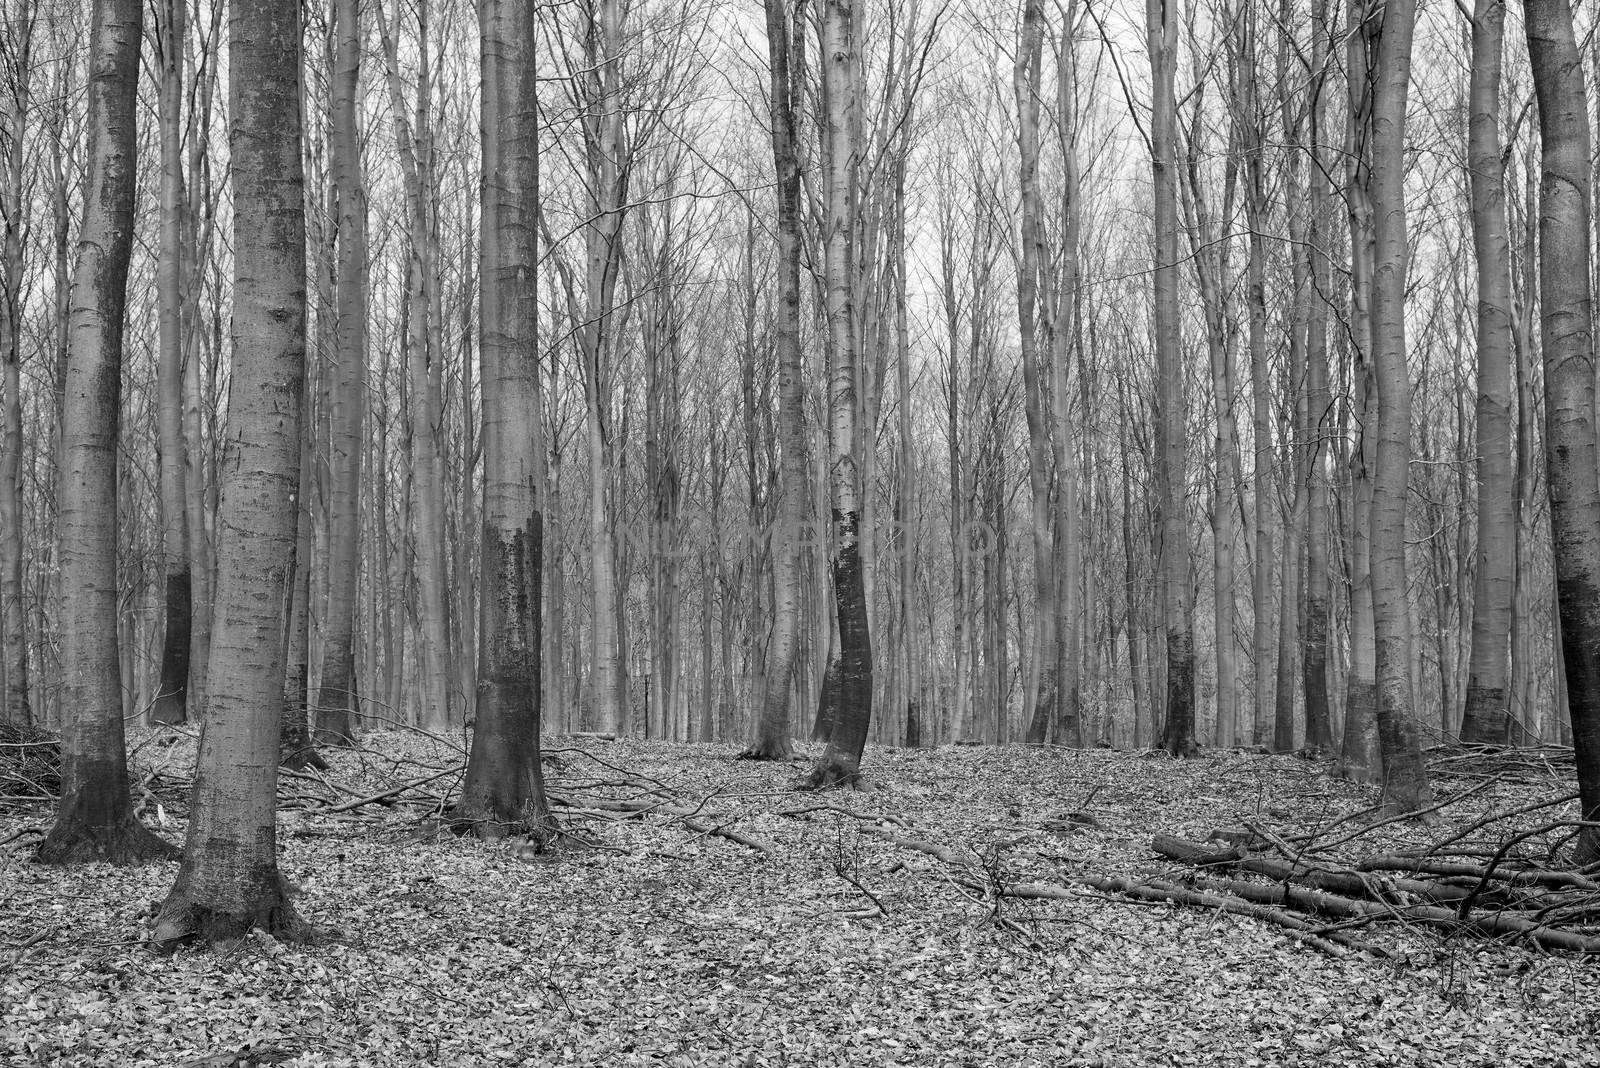 Bright beech forest in spring without any leaves yet black and white